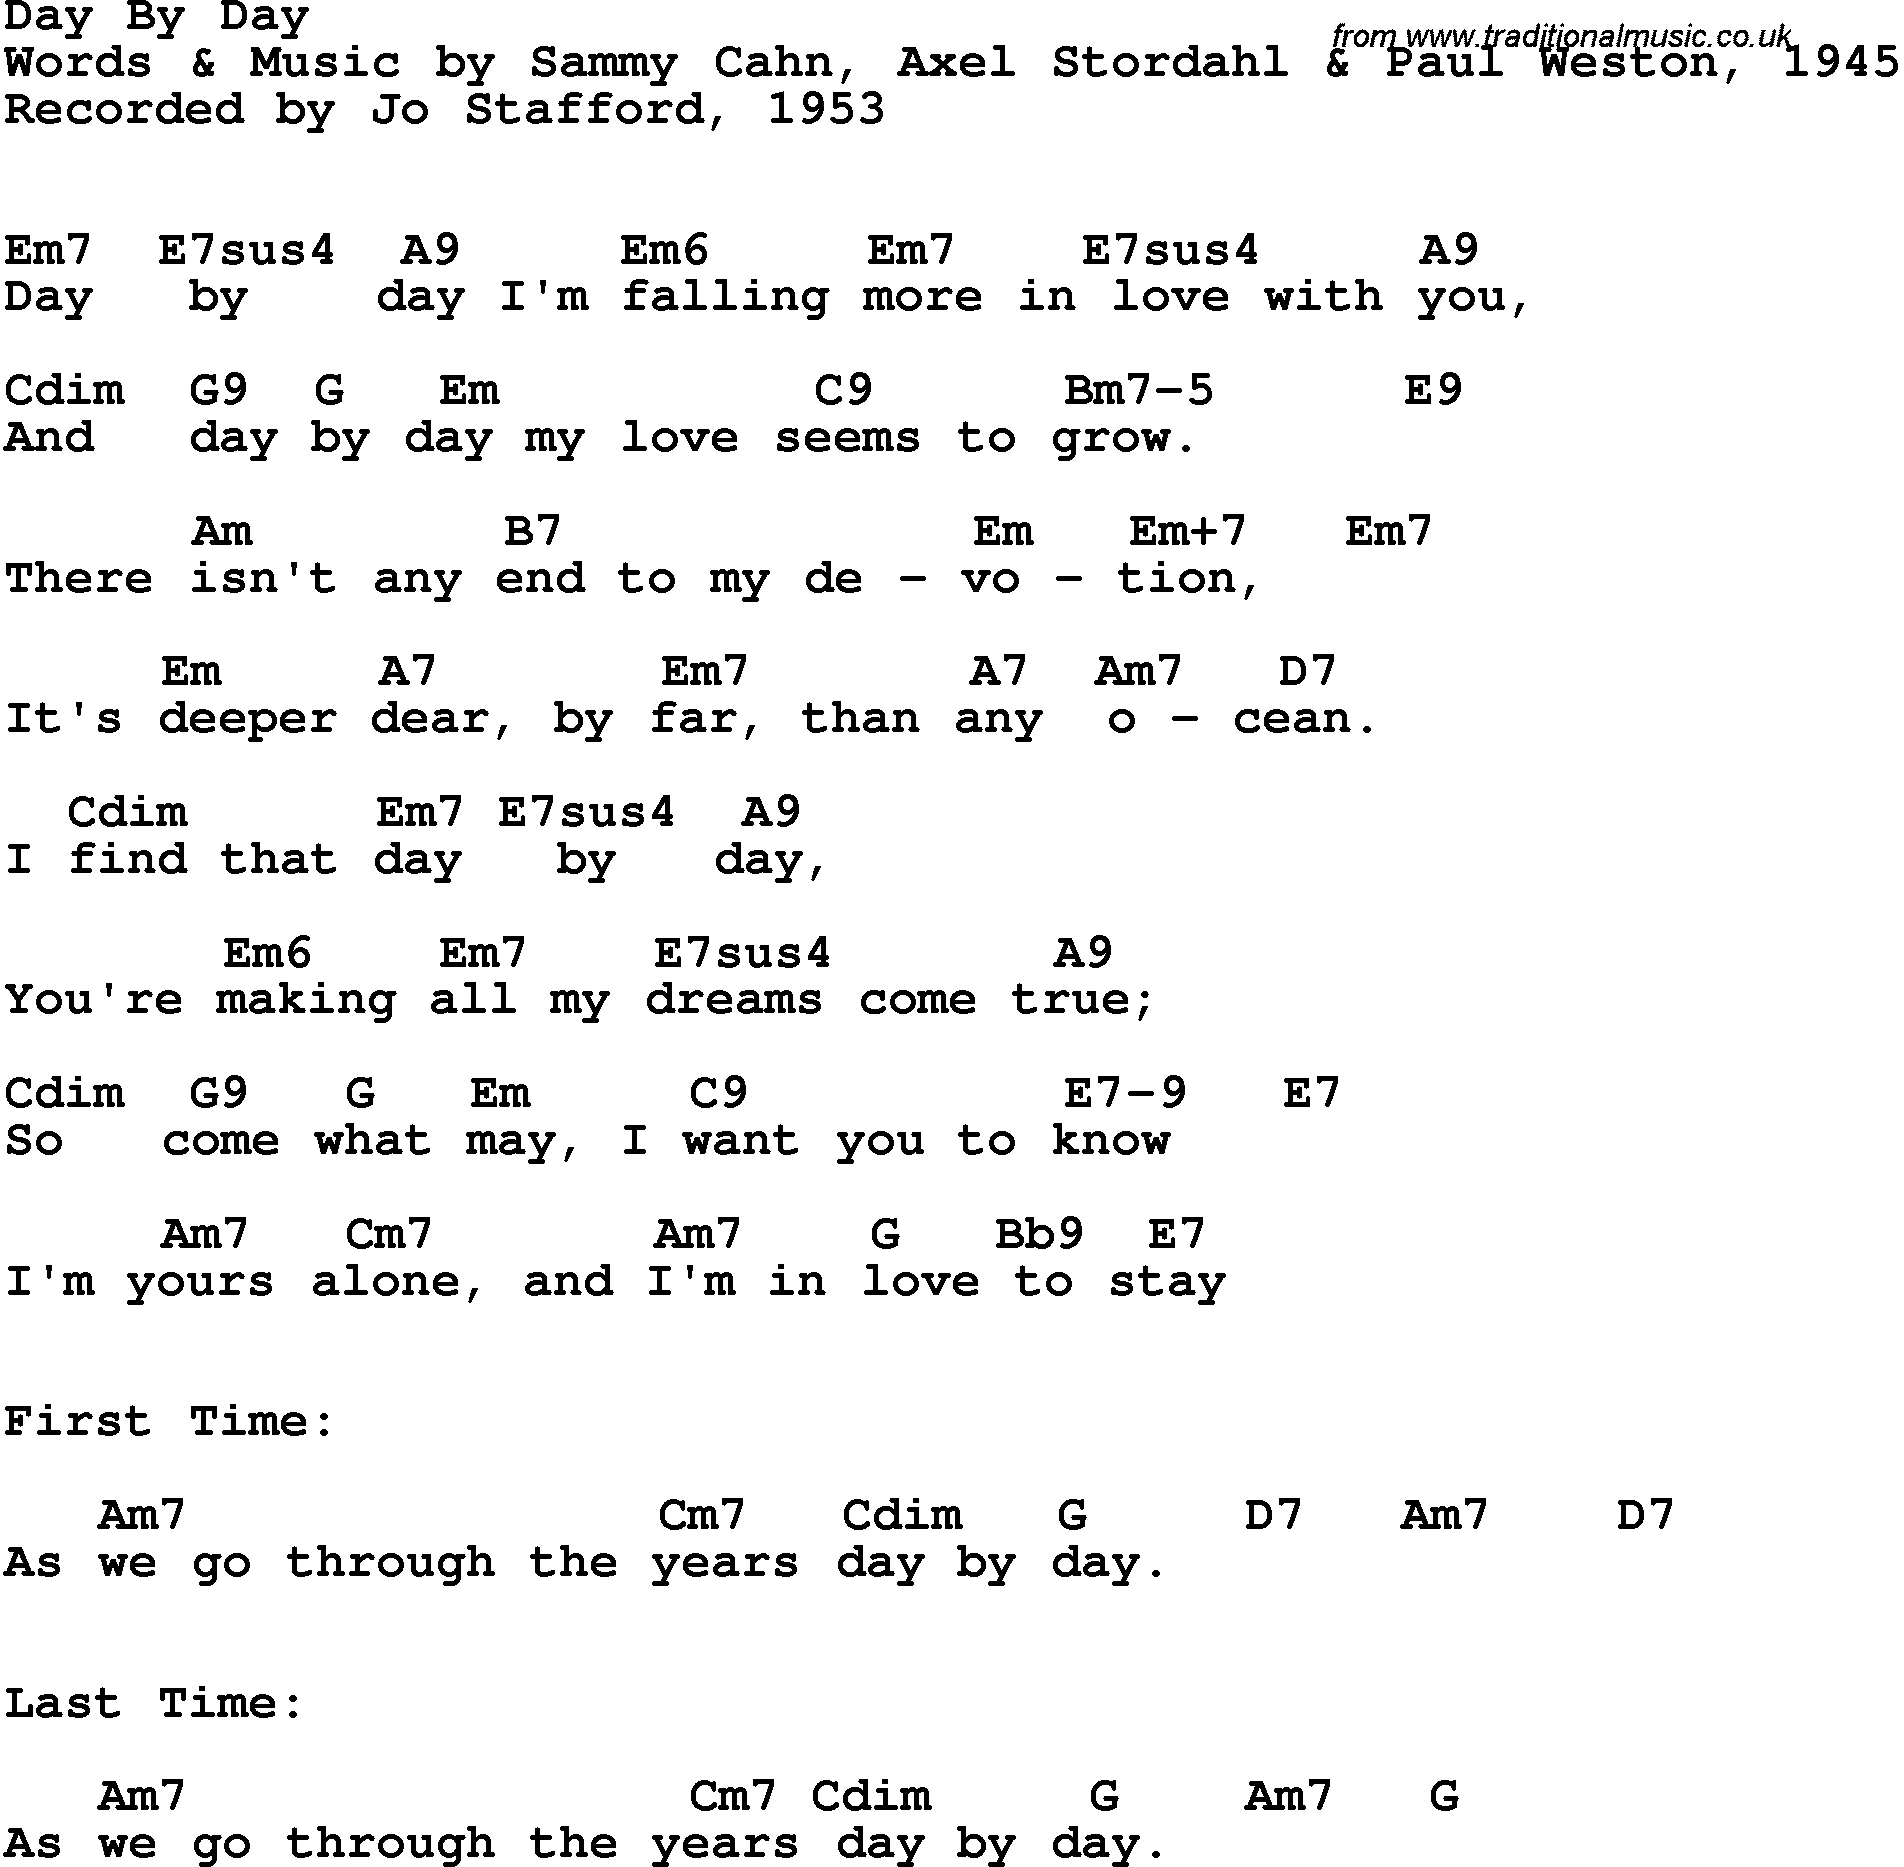 Song Lyrics with guitar chords for Day By Day - Jo Stafford, 1953